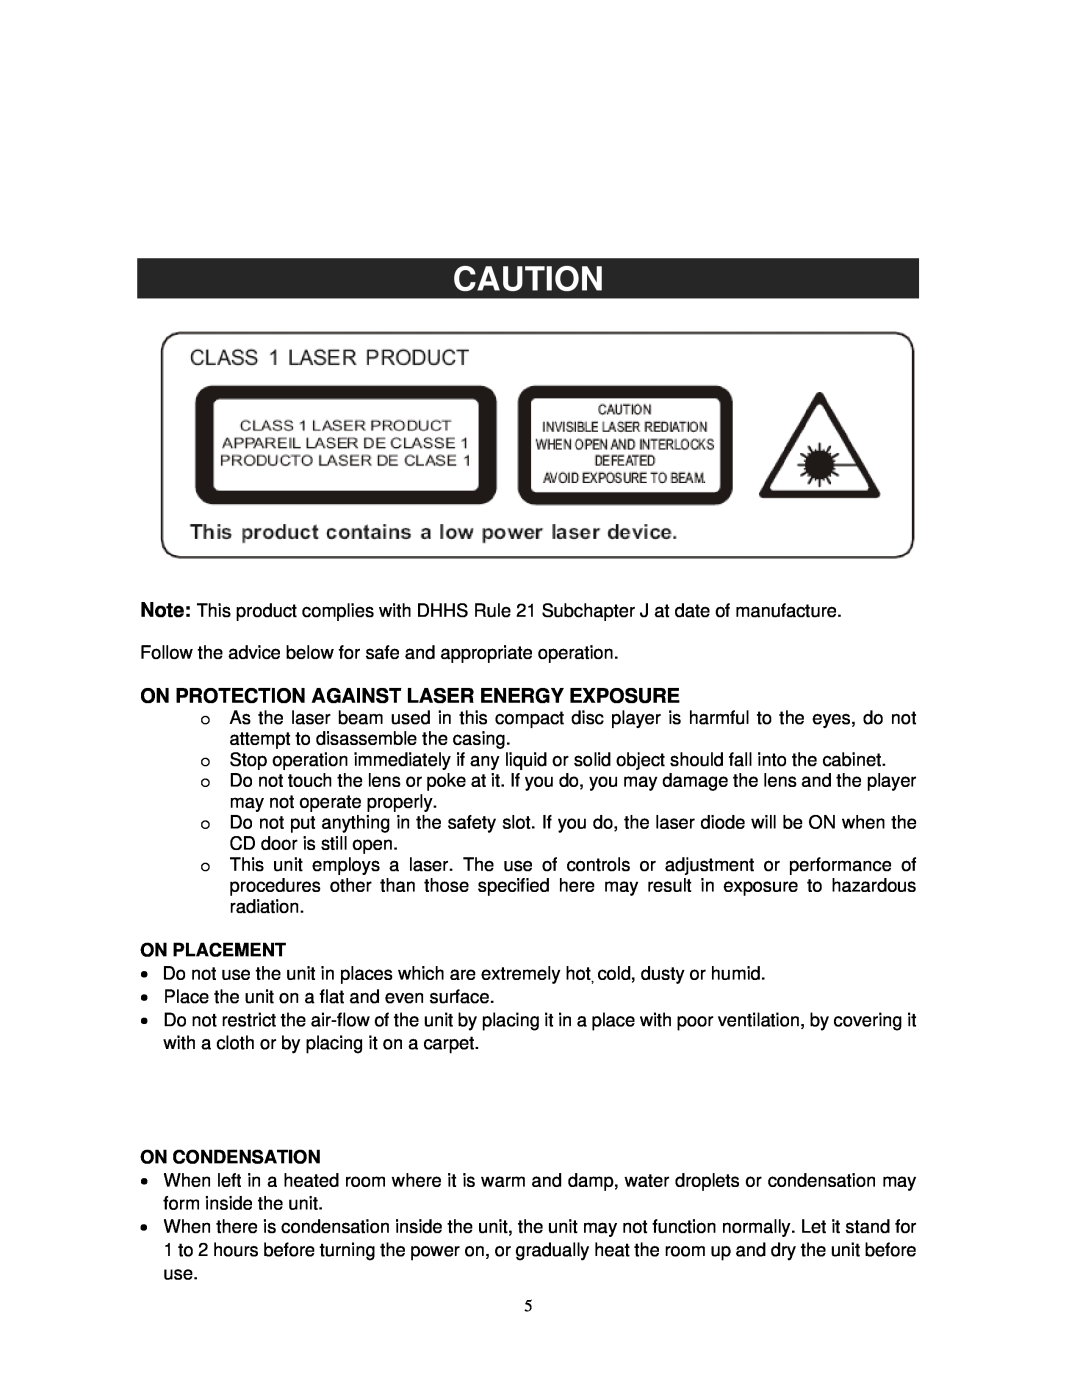 Jensen JTA-475 user manual On Protection Against Laser Energy Exposure, On Placement, On Condensation 